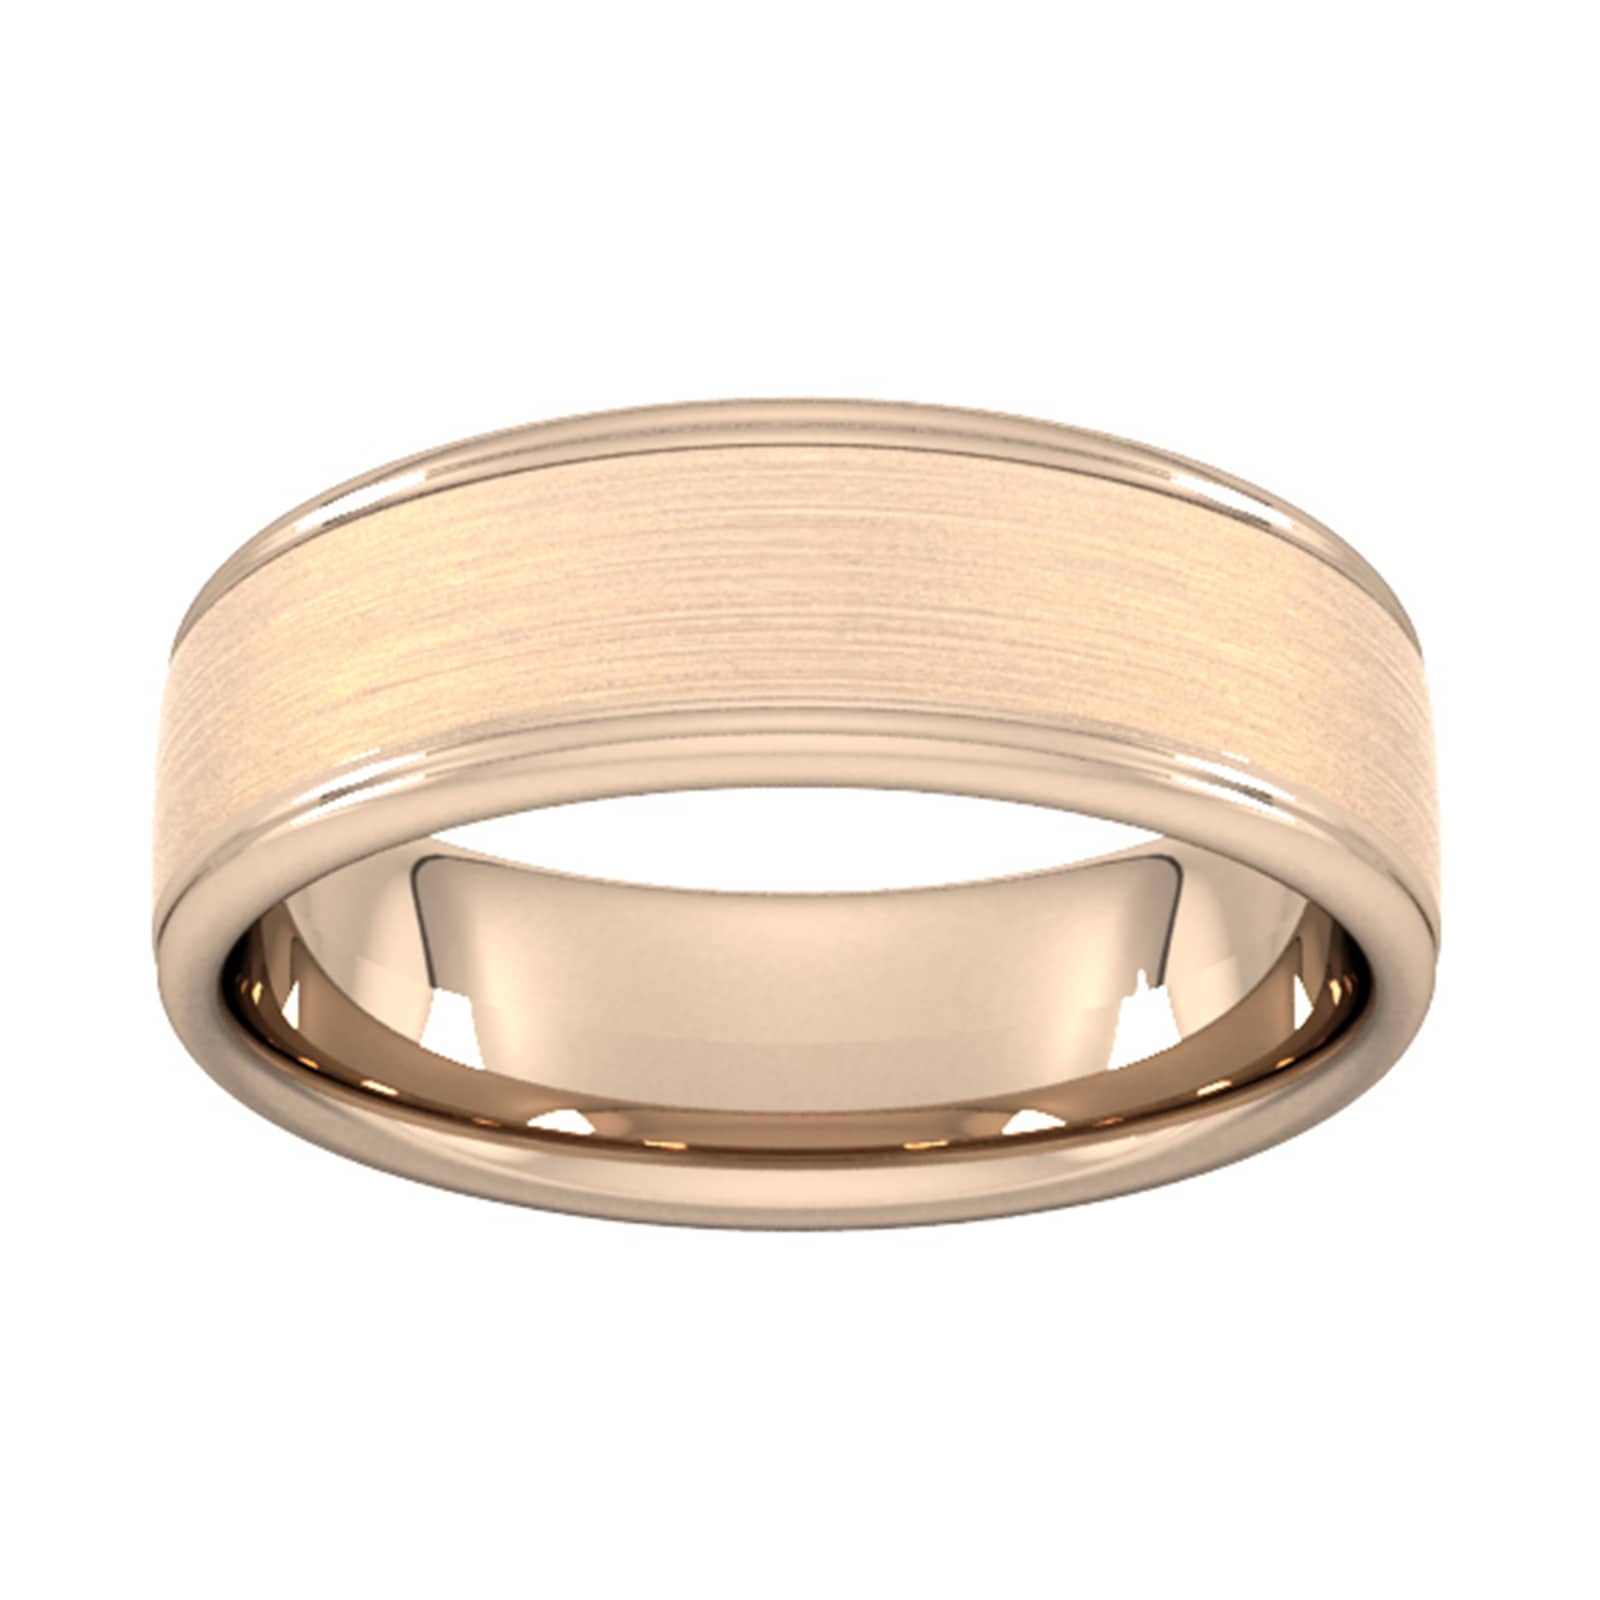 7mm Flat Court Heavy Matt Centre With Grooves Wedding Ring In 9 Carat Rose Gold - Ring Size J